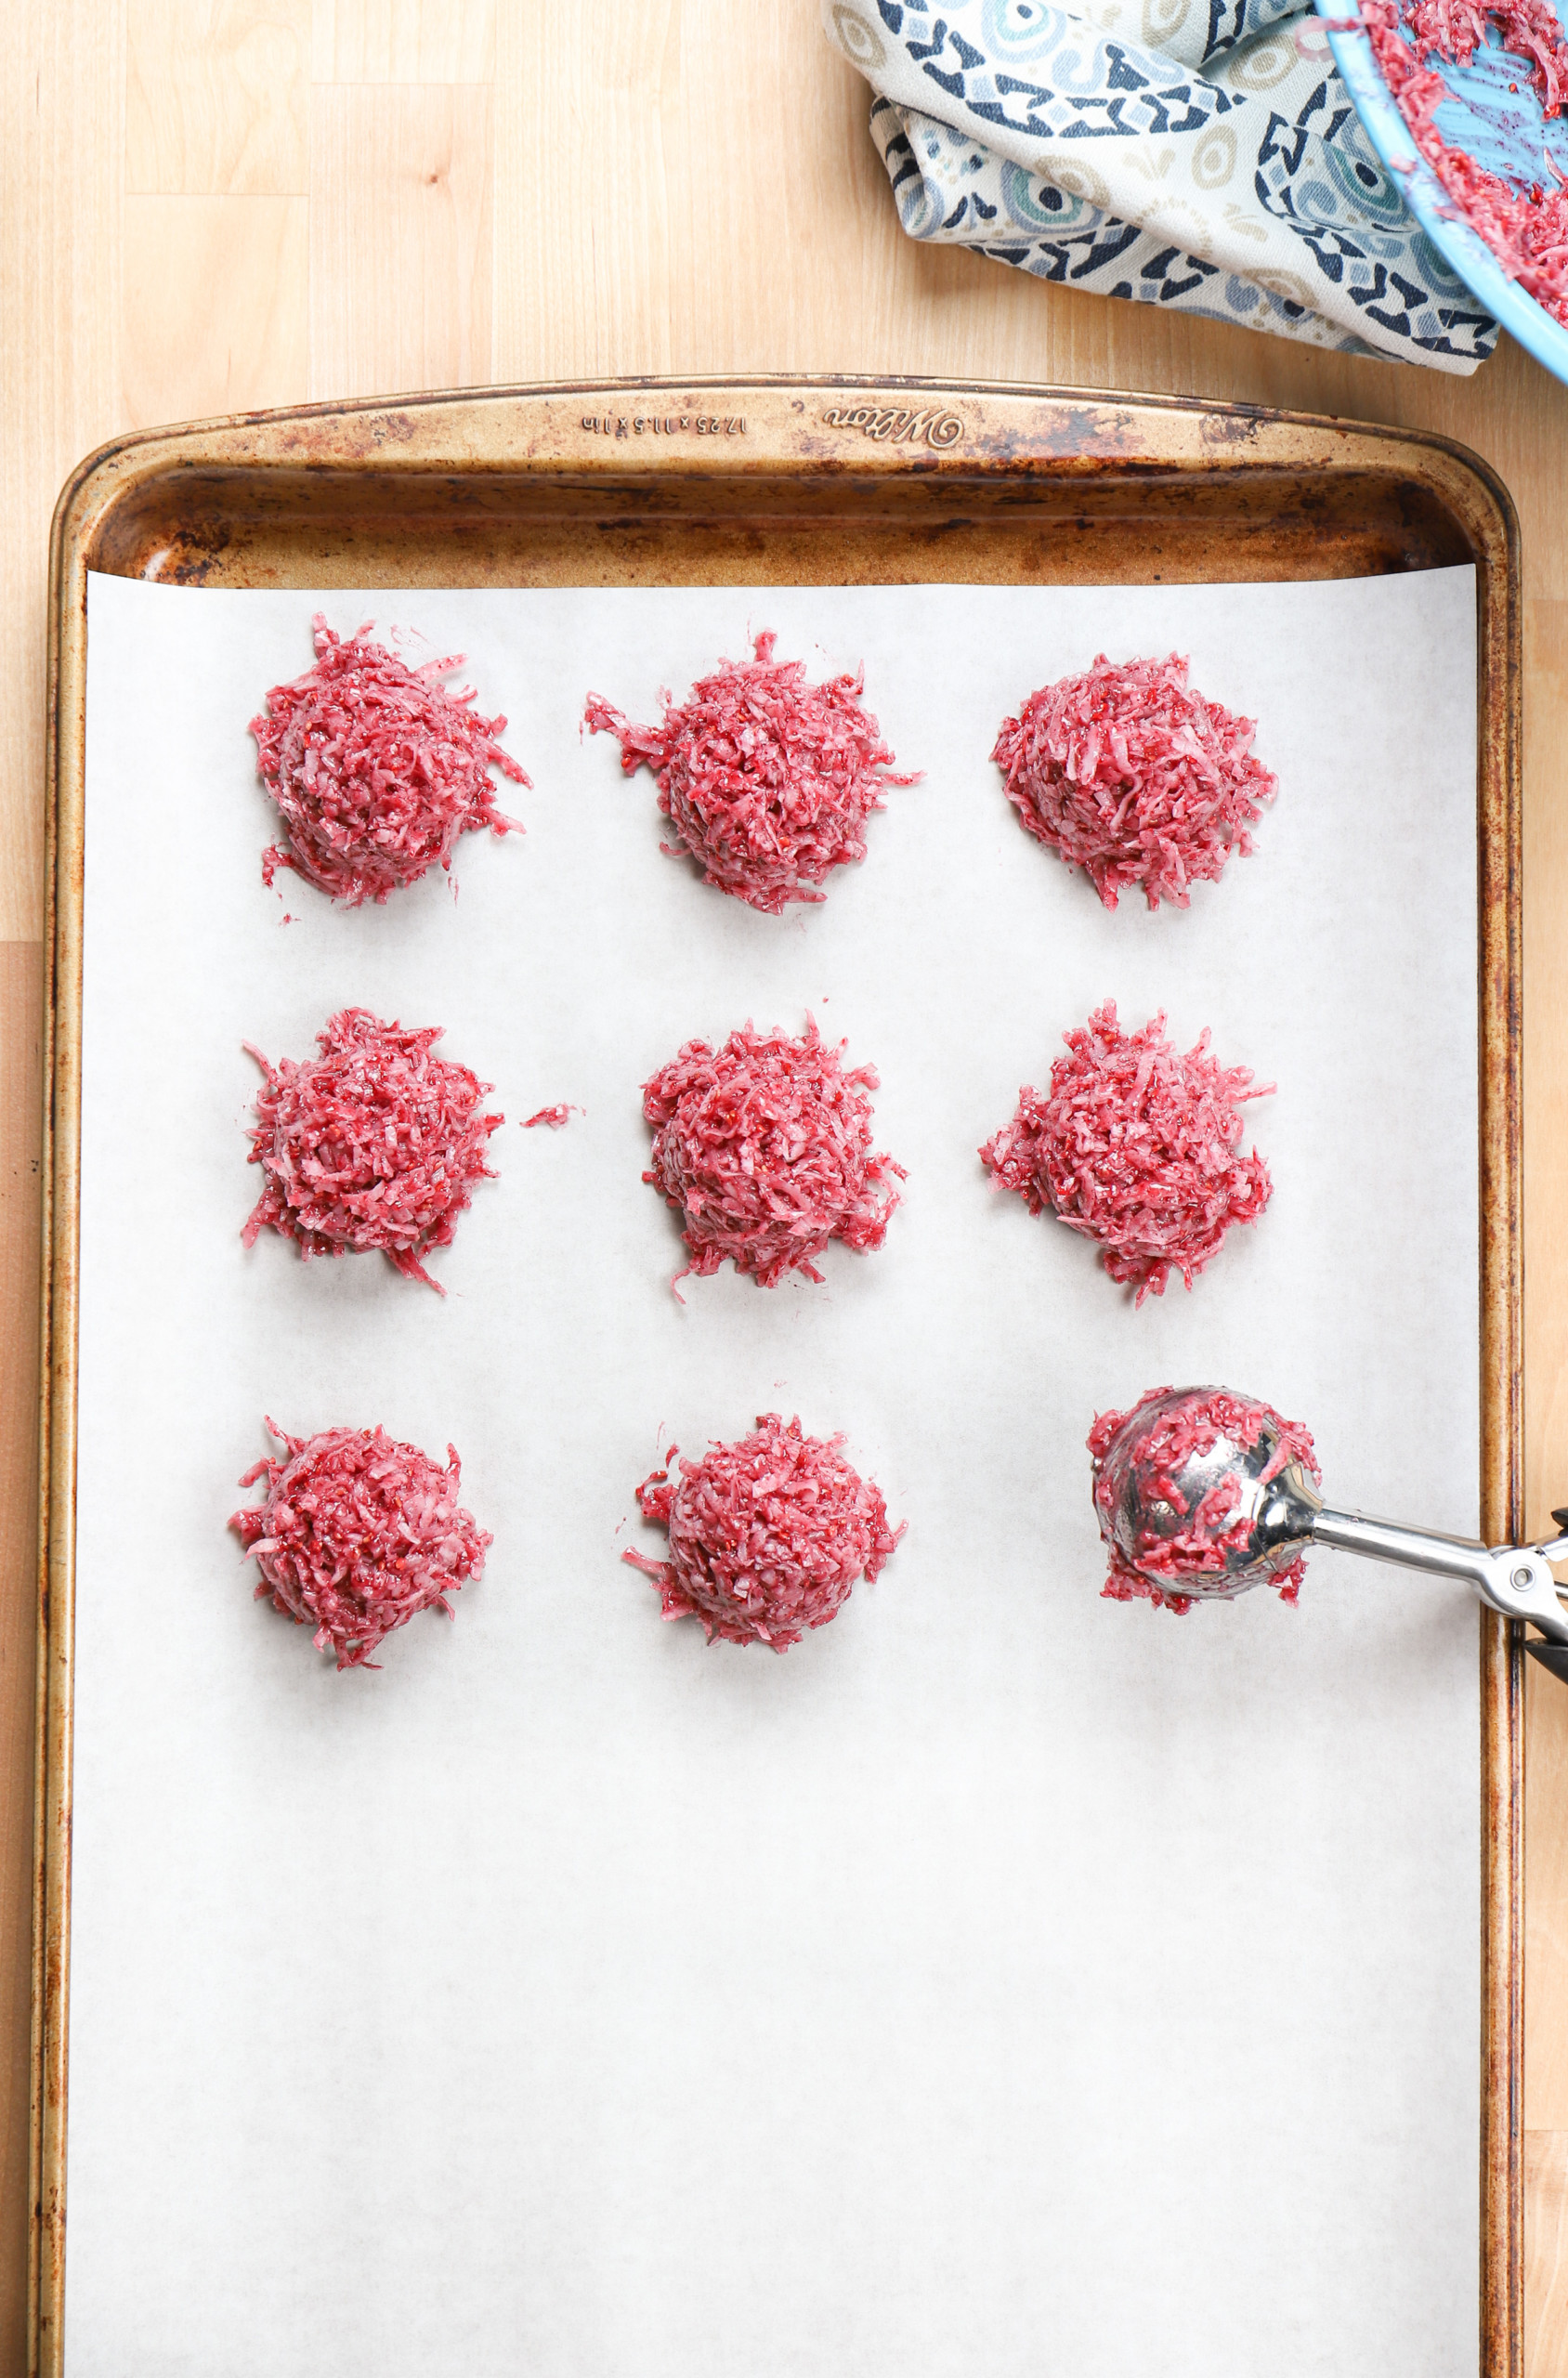 Overhead view of raspberry coconut macaroons being scooped onto a baking sheet with a cookie scoop.